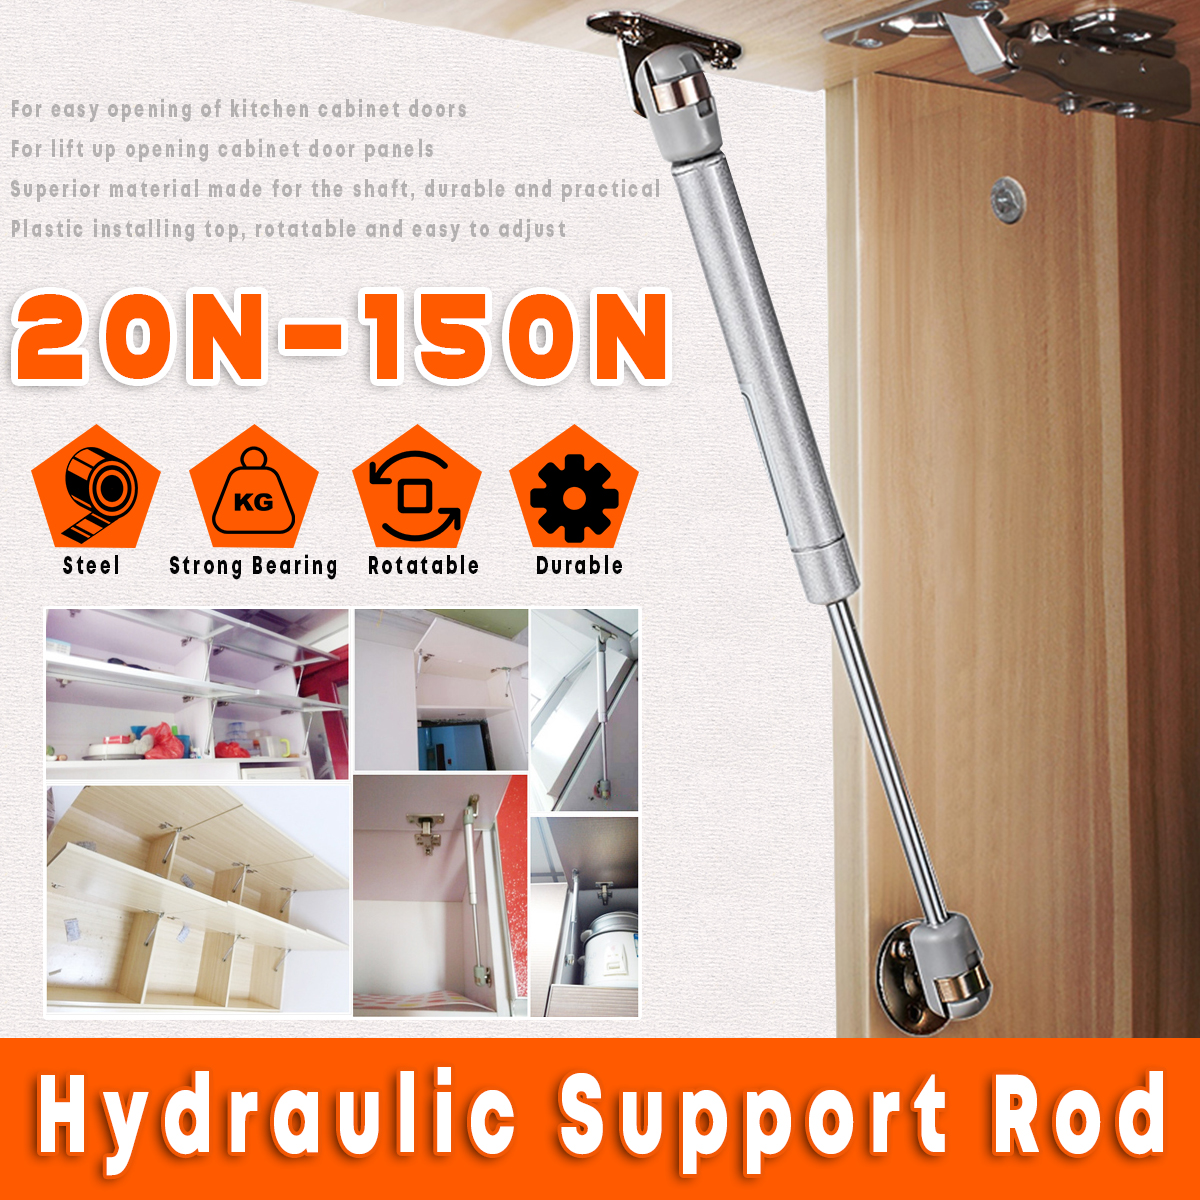 Hydraulic-Support-Rod-Gas-Strut-Lift-Door-Hinges-Levers-Kitchen-Shelf-Furniture-Support-1543869-1